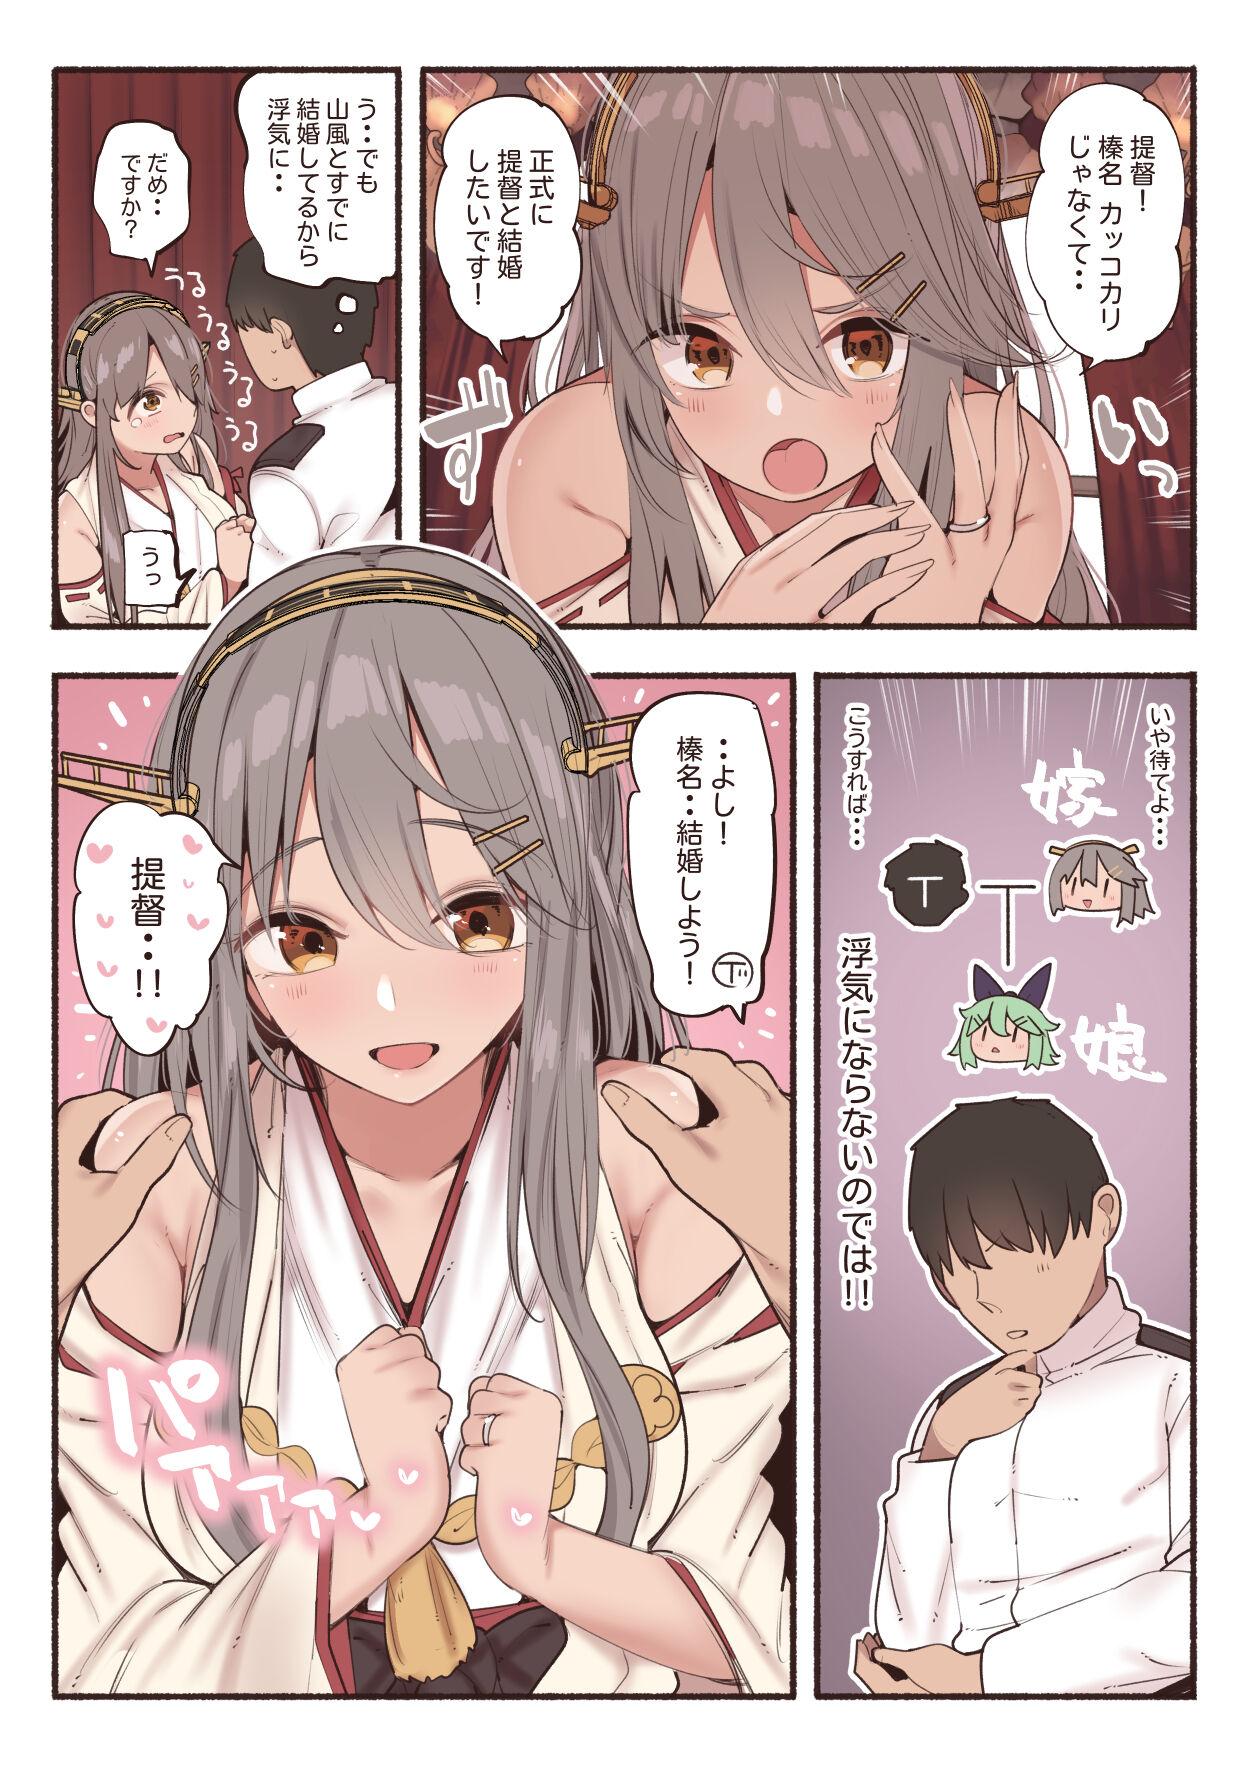 Sucking Cock 榛名と結婚初夜 - Kantai collection Cum - Picture 2